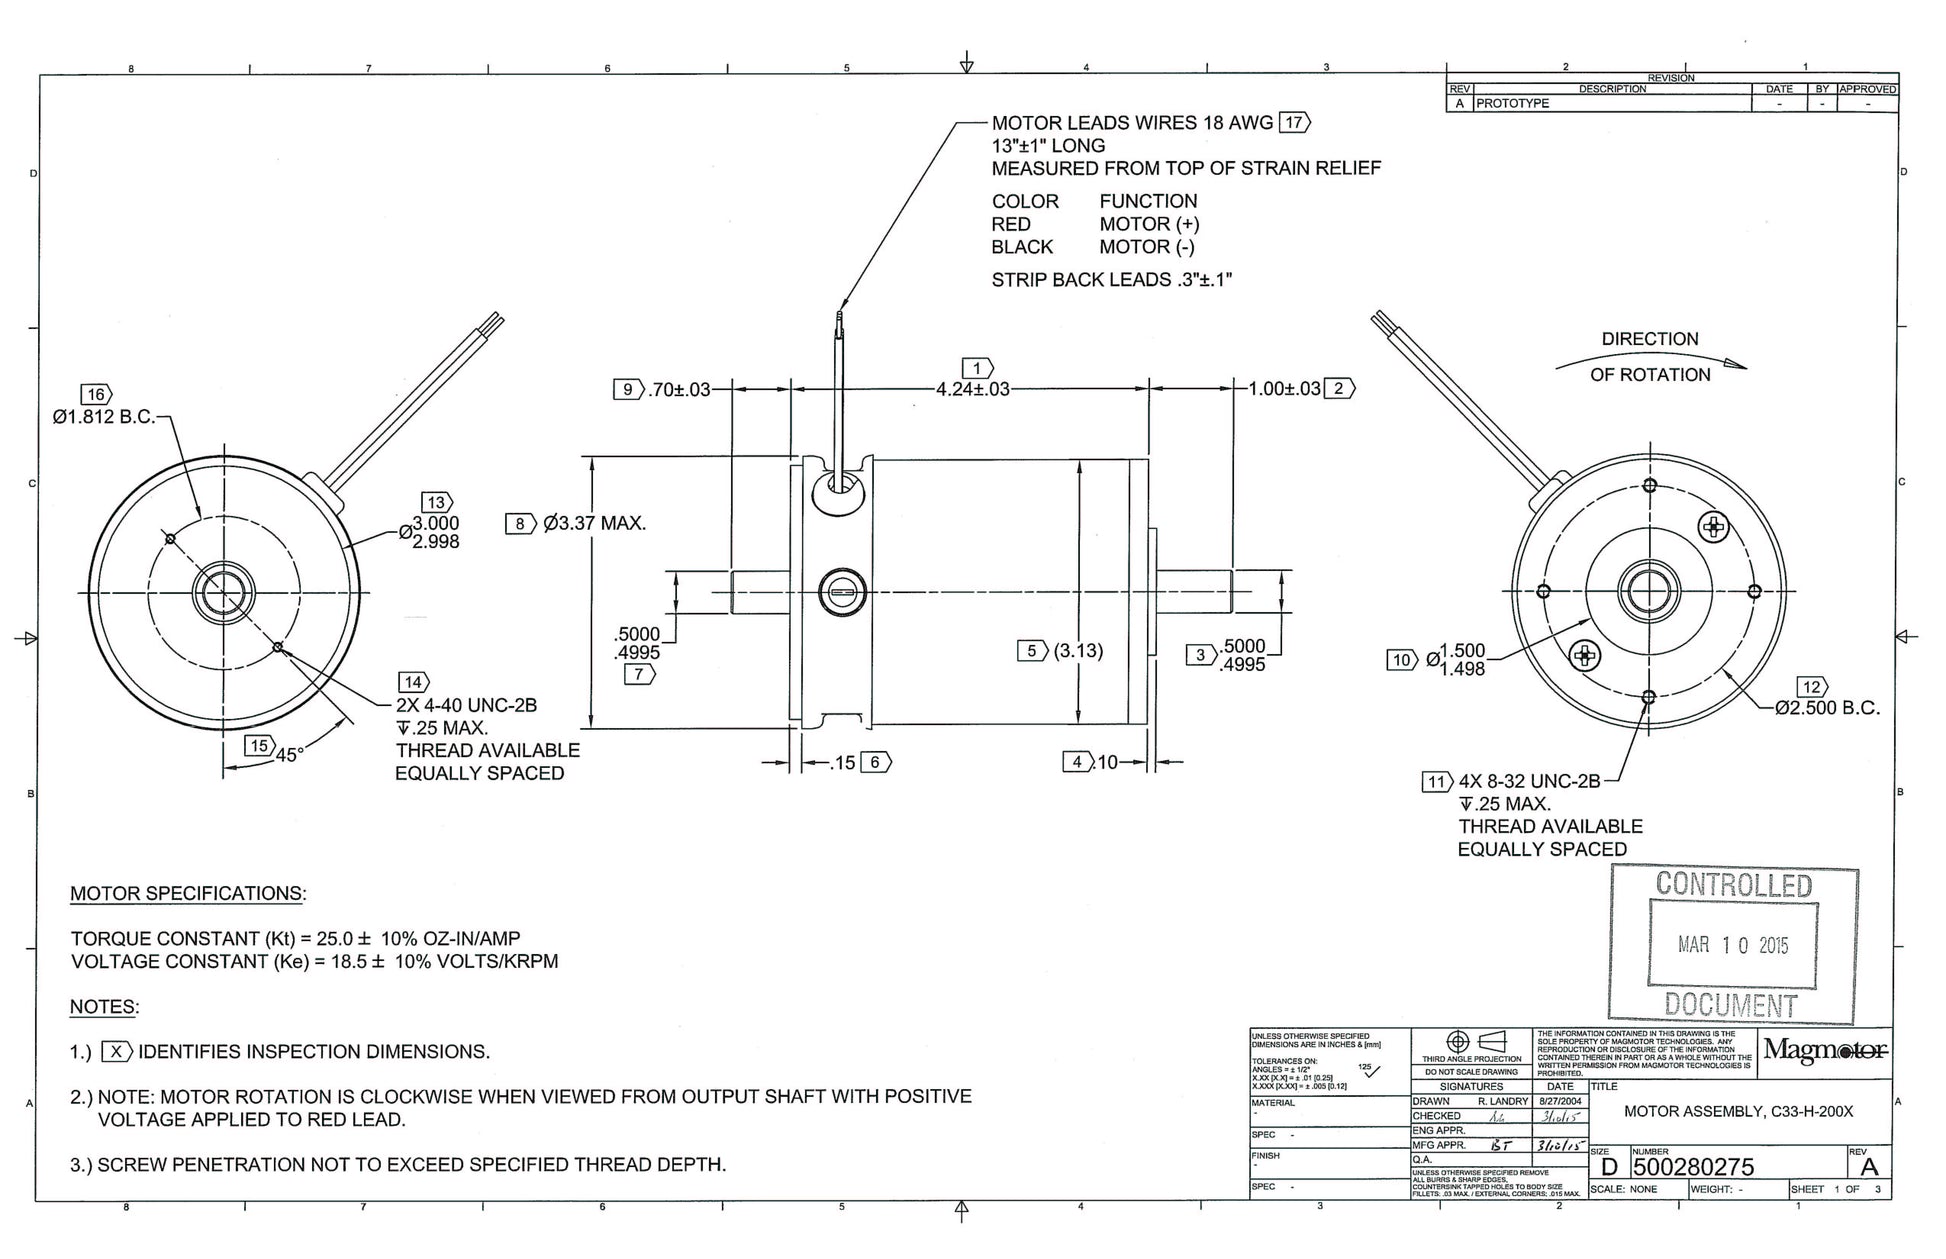 Magmotor C33-H-200X 24 to 60 Volt 4 Pole Brushed Motor Design Drawing